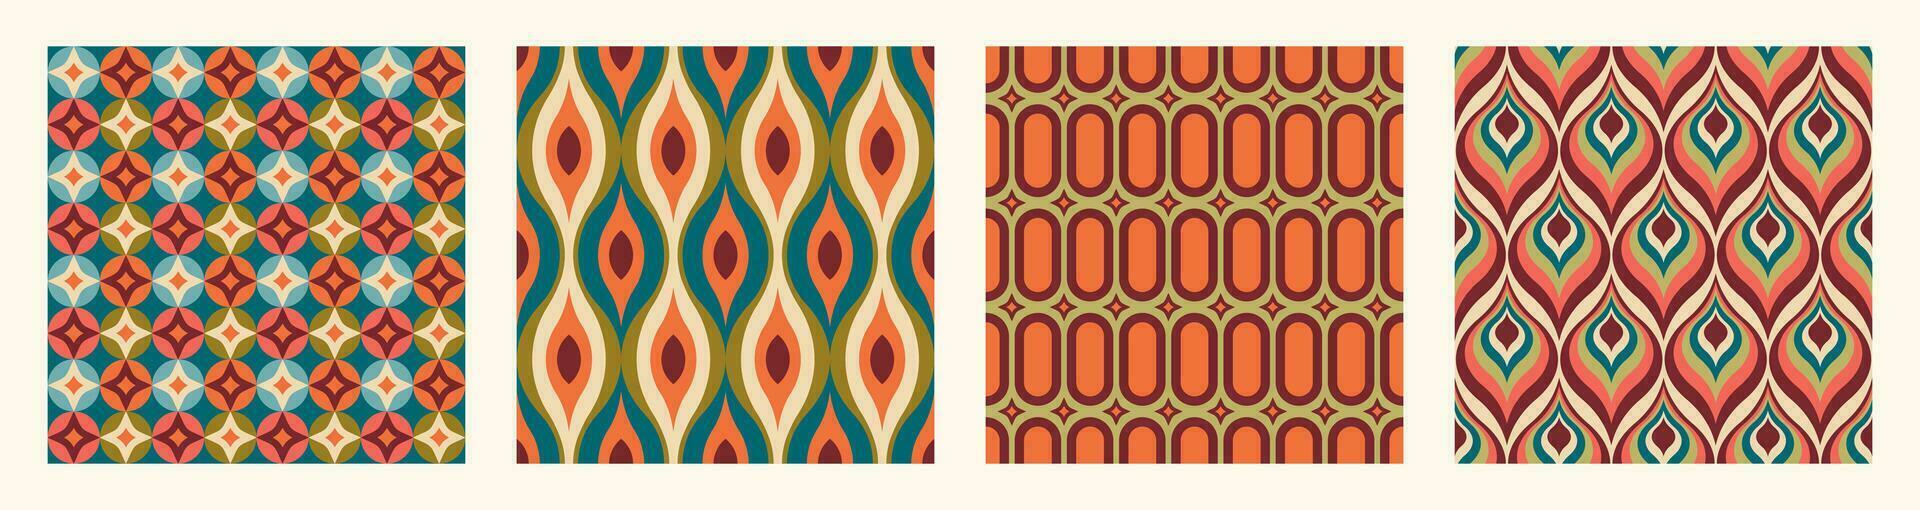 Set of Aesthetic mid century printable seamless pattern with retro design. Decorative 50s, 60s, 70s style Vintage modern background in minimalist mid century style for fabric, wallpaper or wrapping vector